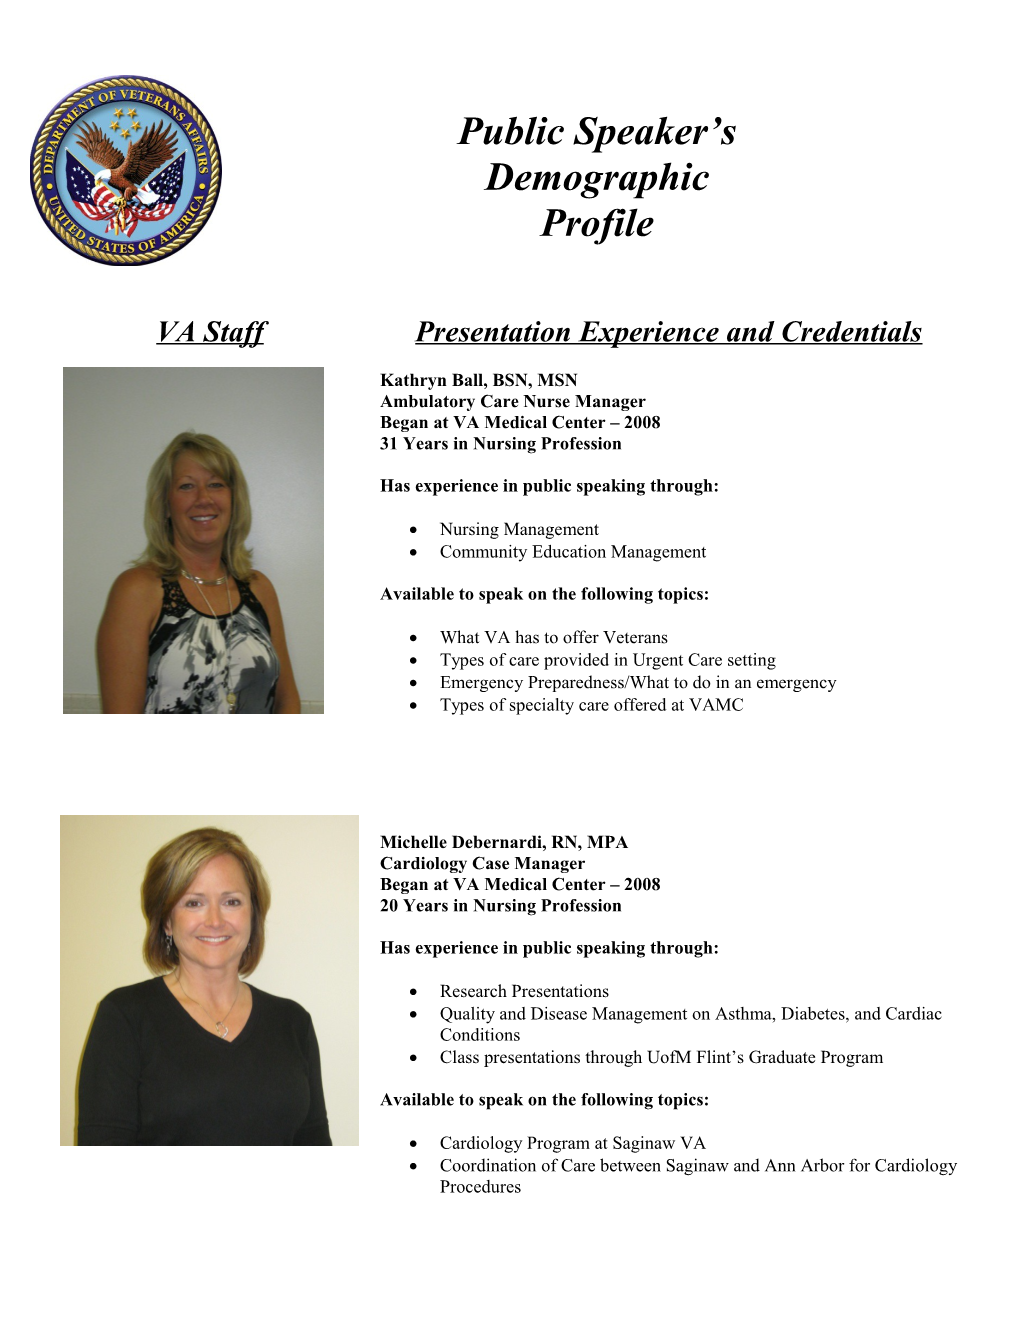 Presentation Experience and Credentials